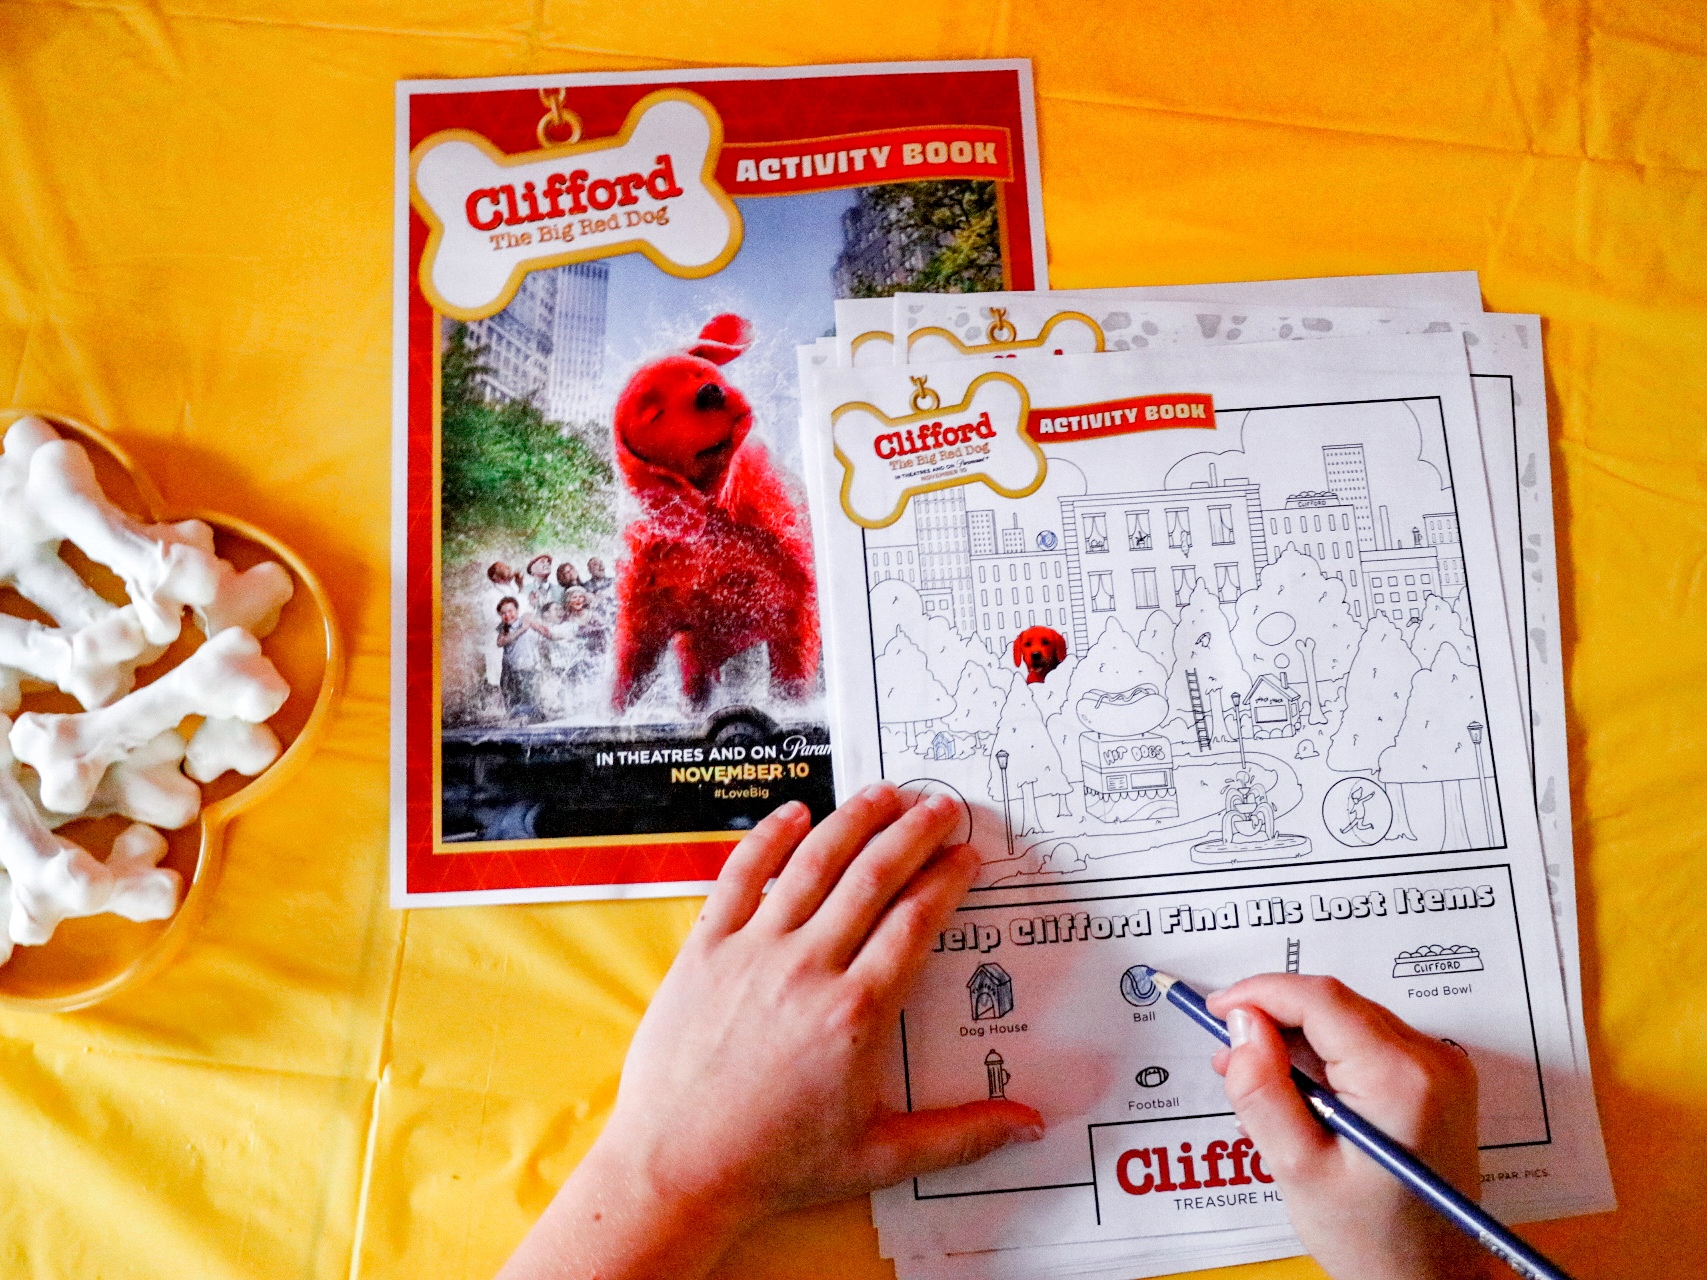 Clifford crafts and activities in the Clifford birthday party theme